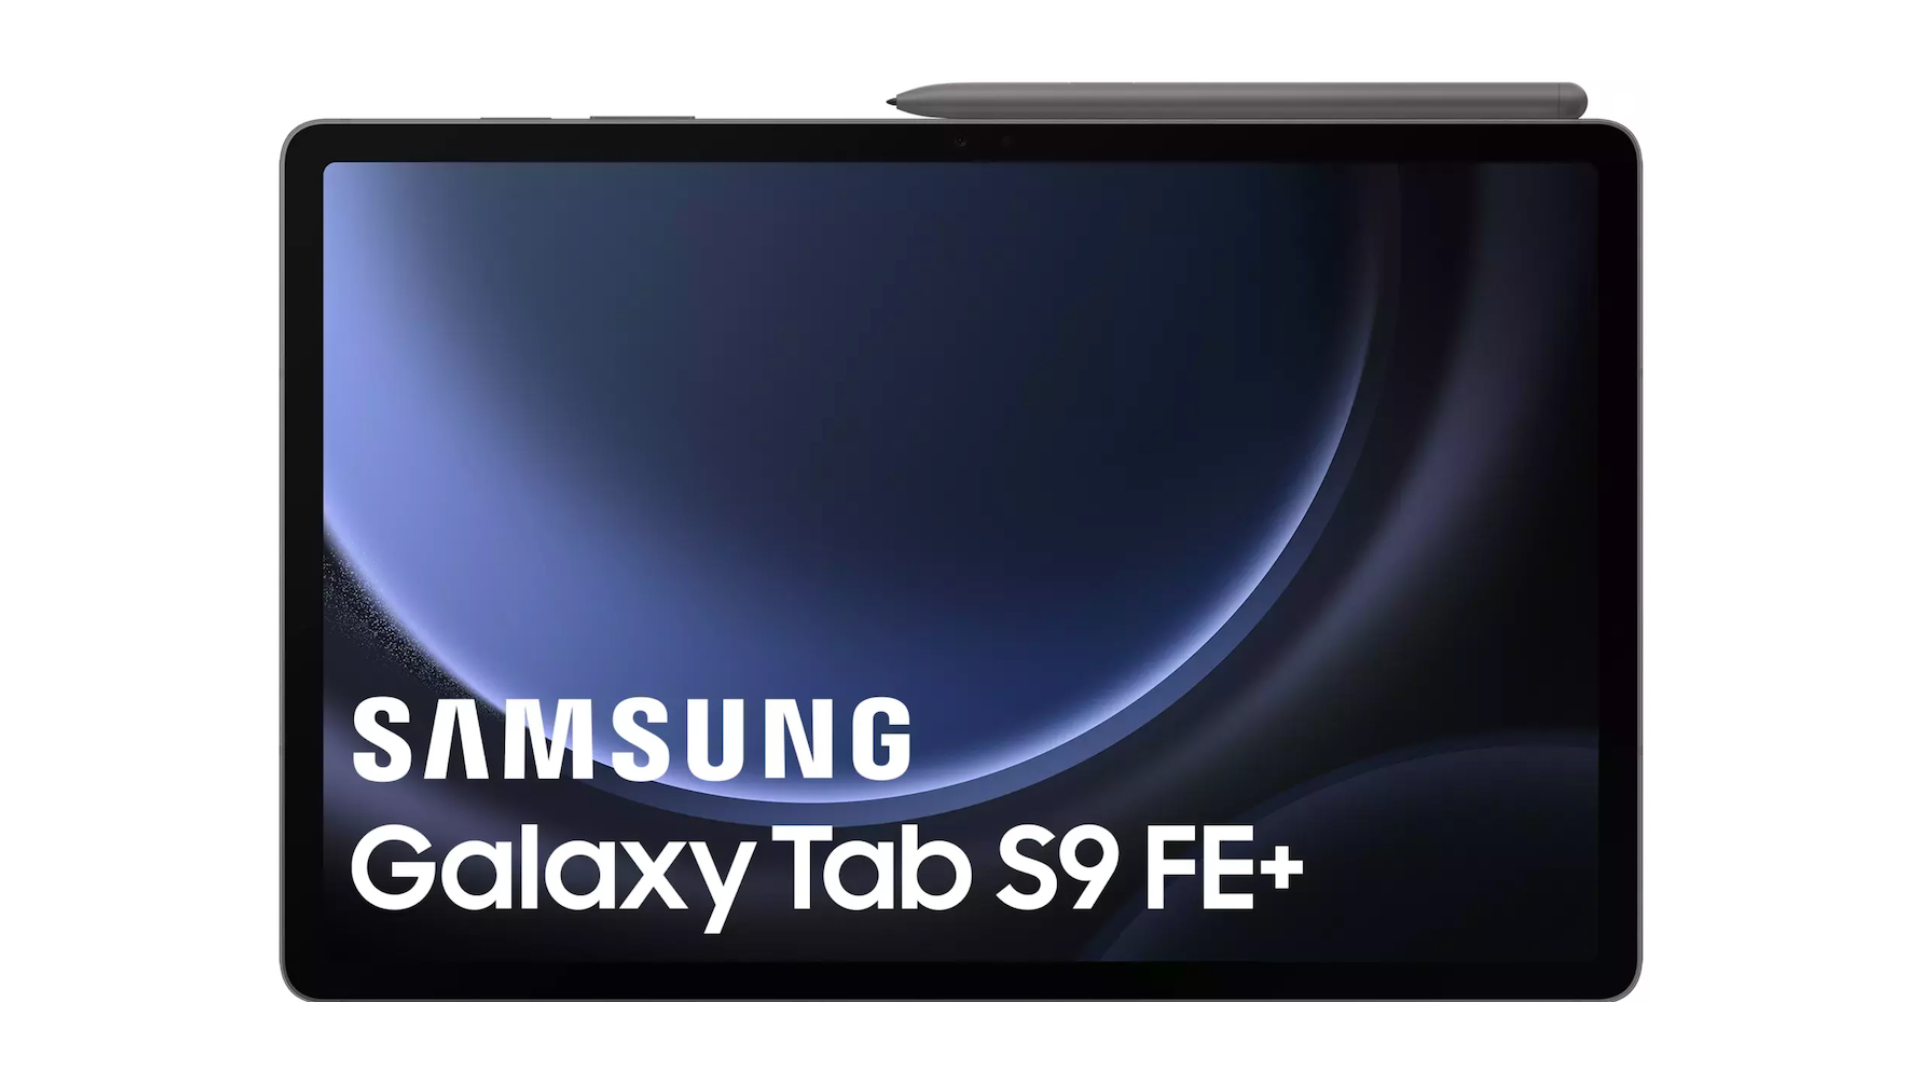 Samsung Galaxy Tab S9 Ultra specs and design leaked ahead of